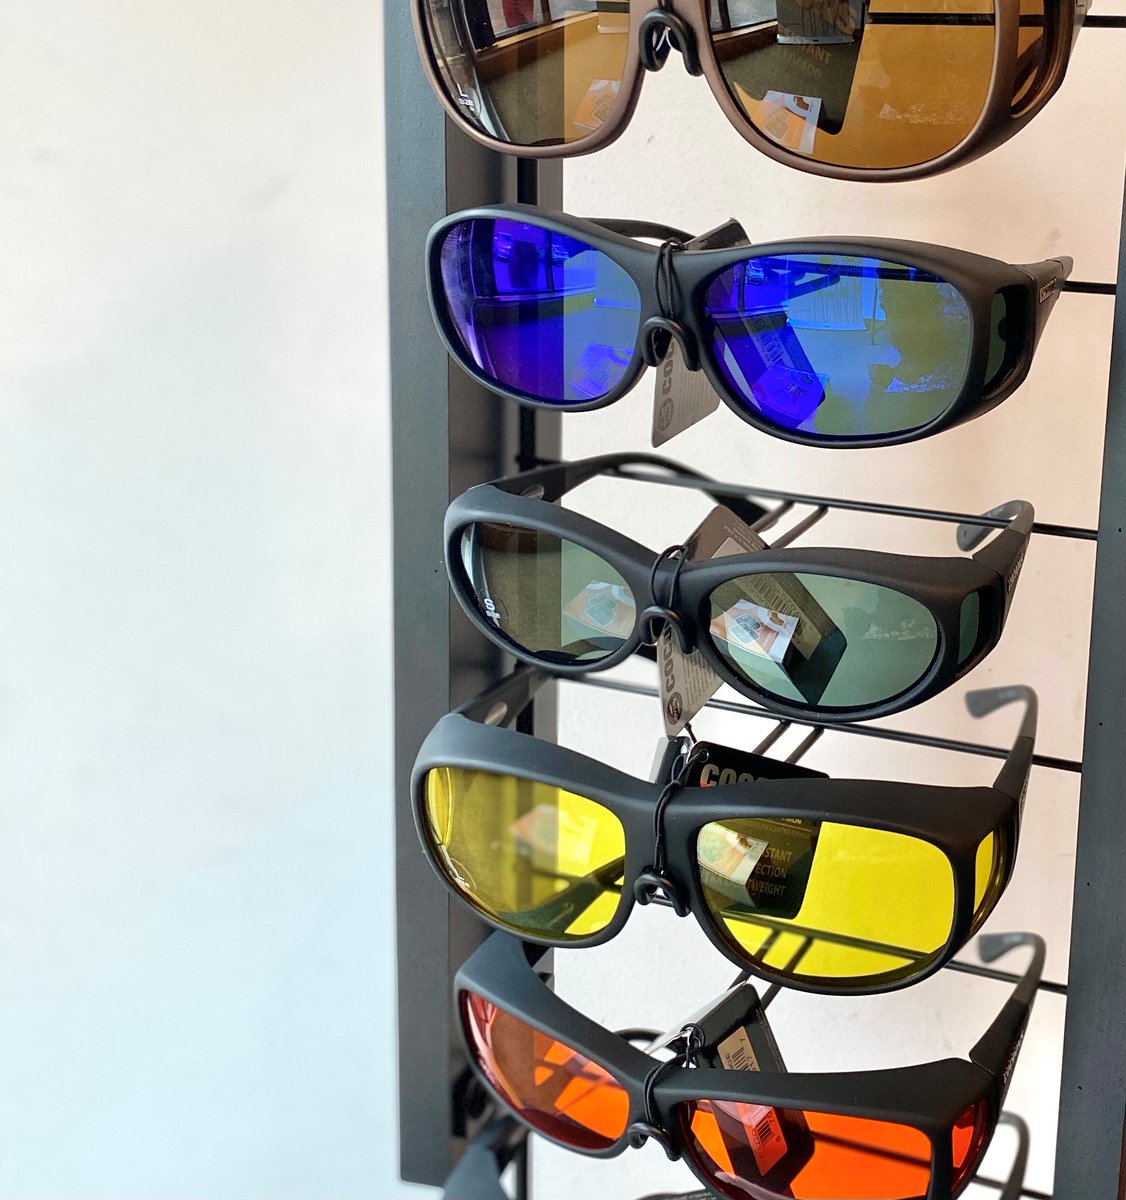 Summer is almost here, which means it's time to find sunglasses that will not only match your snazzy summer outfits but also protect your eyes from the sun. Our Cocoon sunglasses protect your eyes and are built to last! Get in touch to come try out which glasses are best for you.